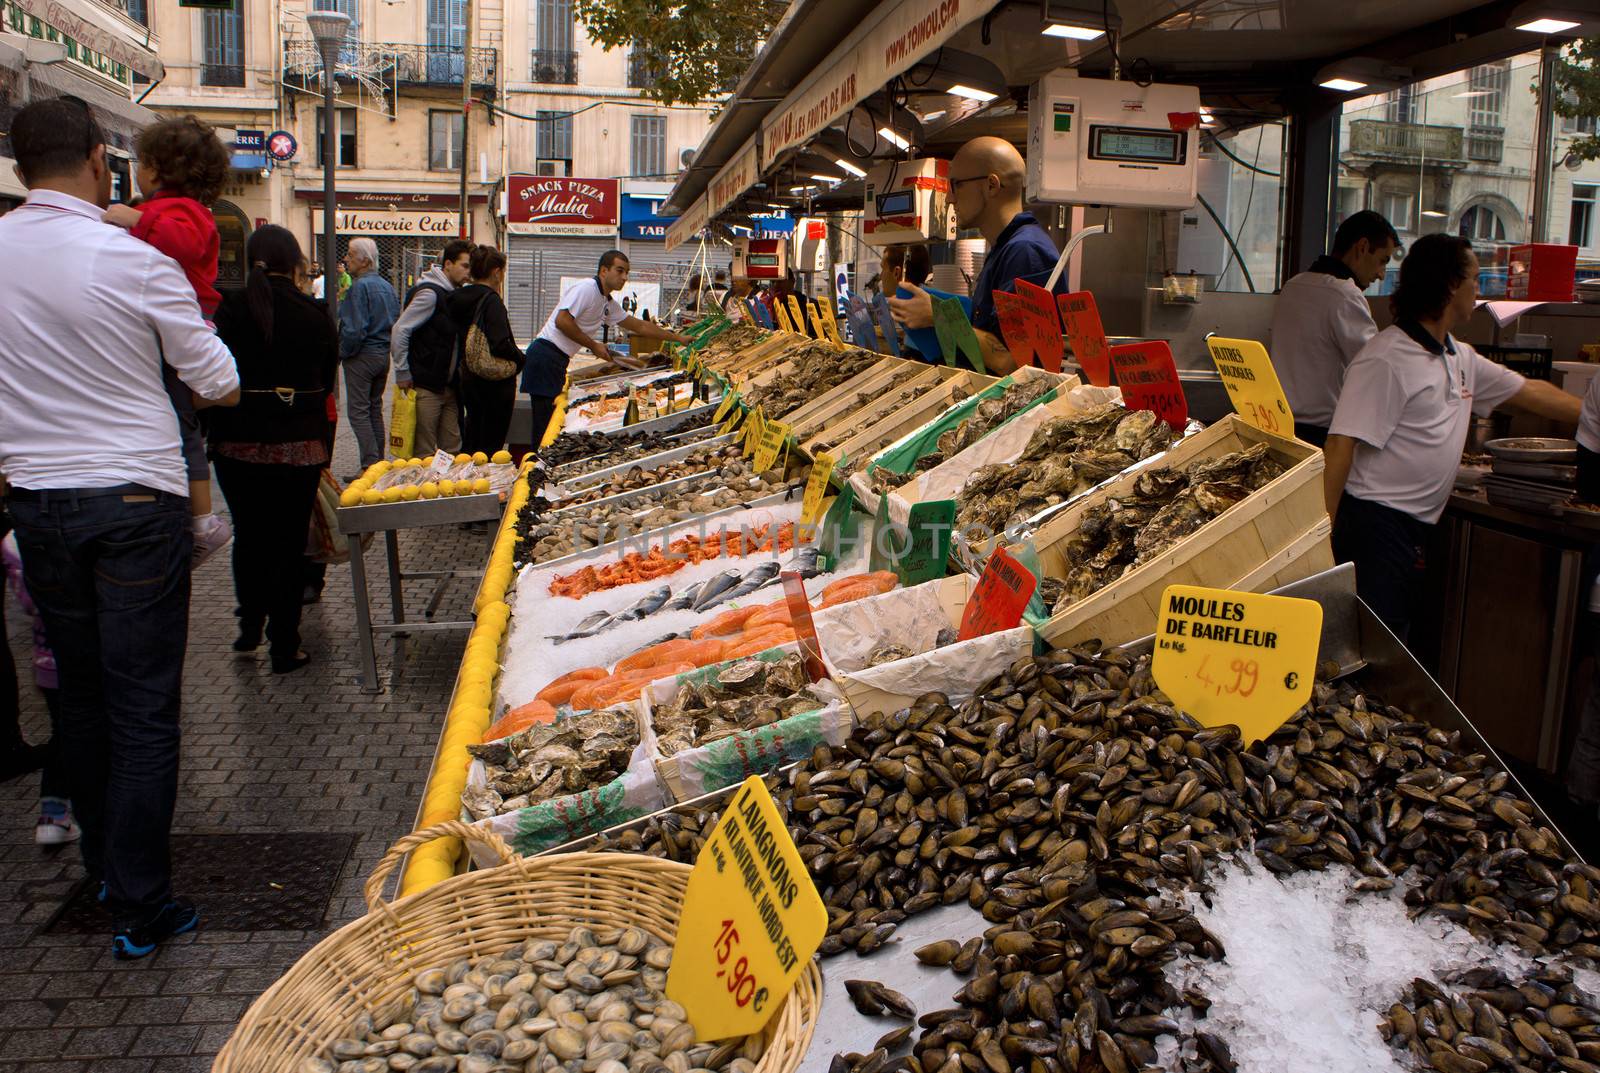 Marseille, France - 2013, November 2: People buying and selling seafood in a street market. On Marseille, France, on November 2, 2013.